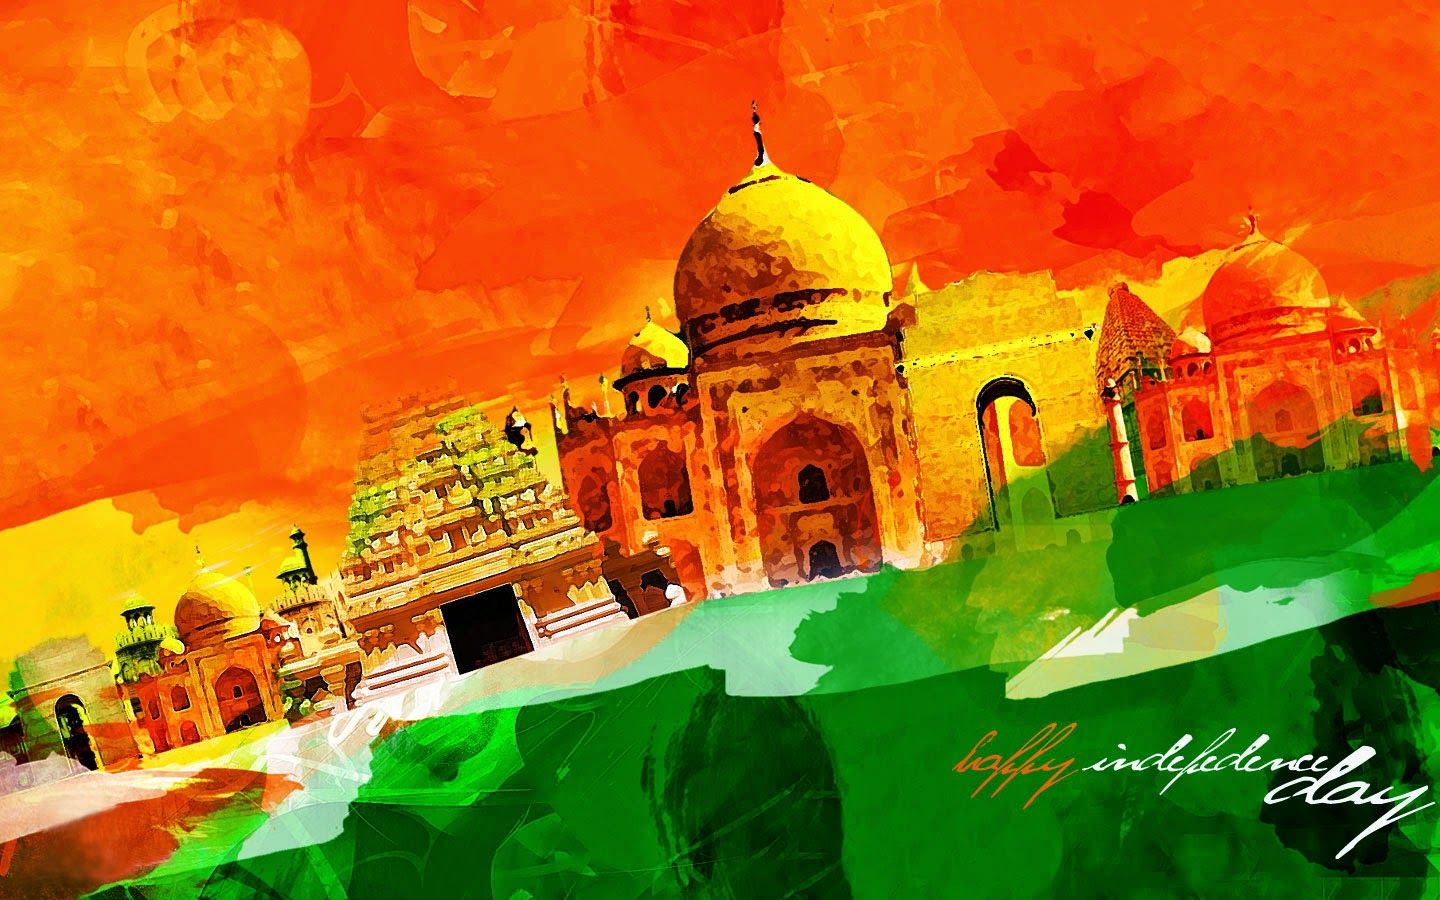 Infotainment, Jobs, Tourism, Telugu Stories, Personality Development: Independence Day Wallpaper India August 1947